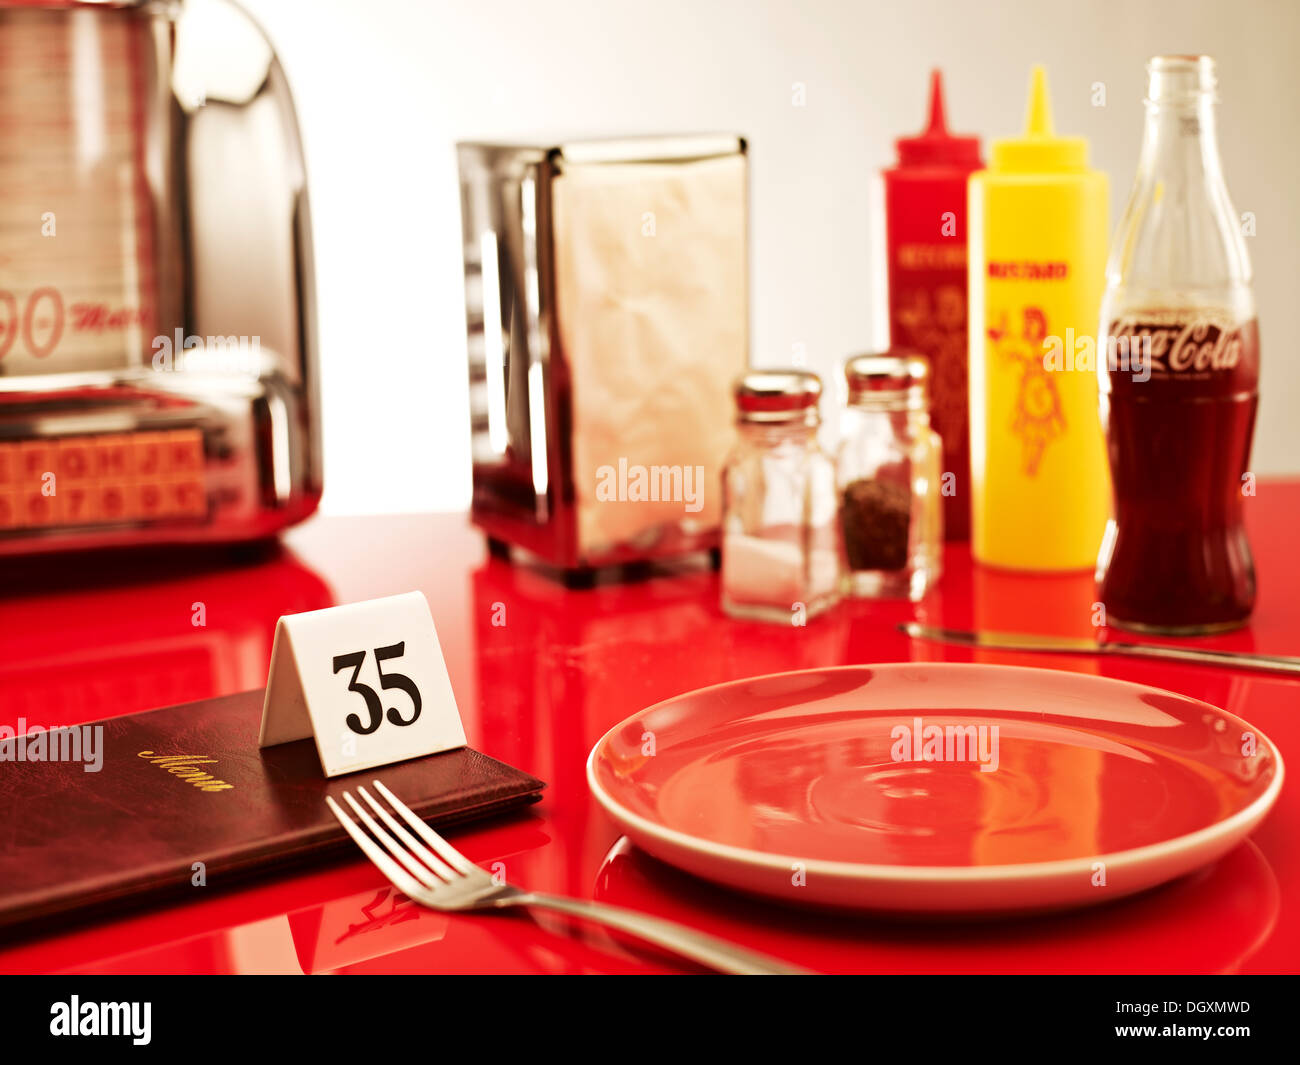 Empty plate American style diner Stock Photo